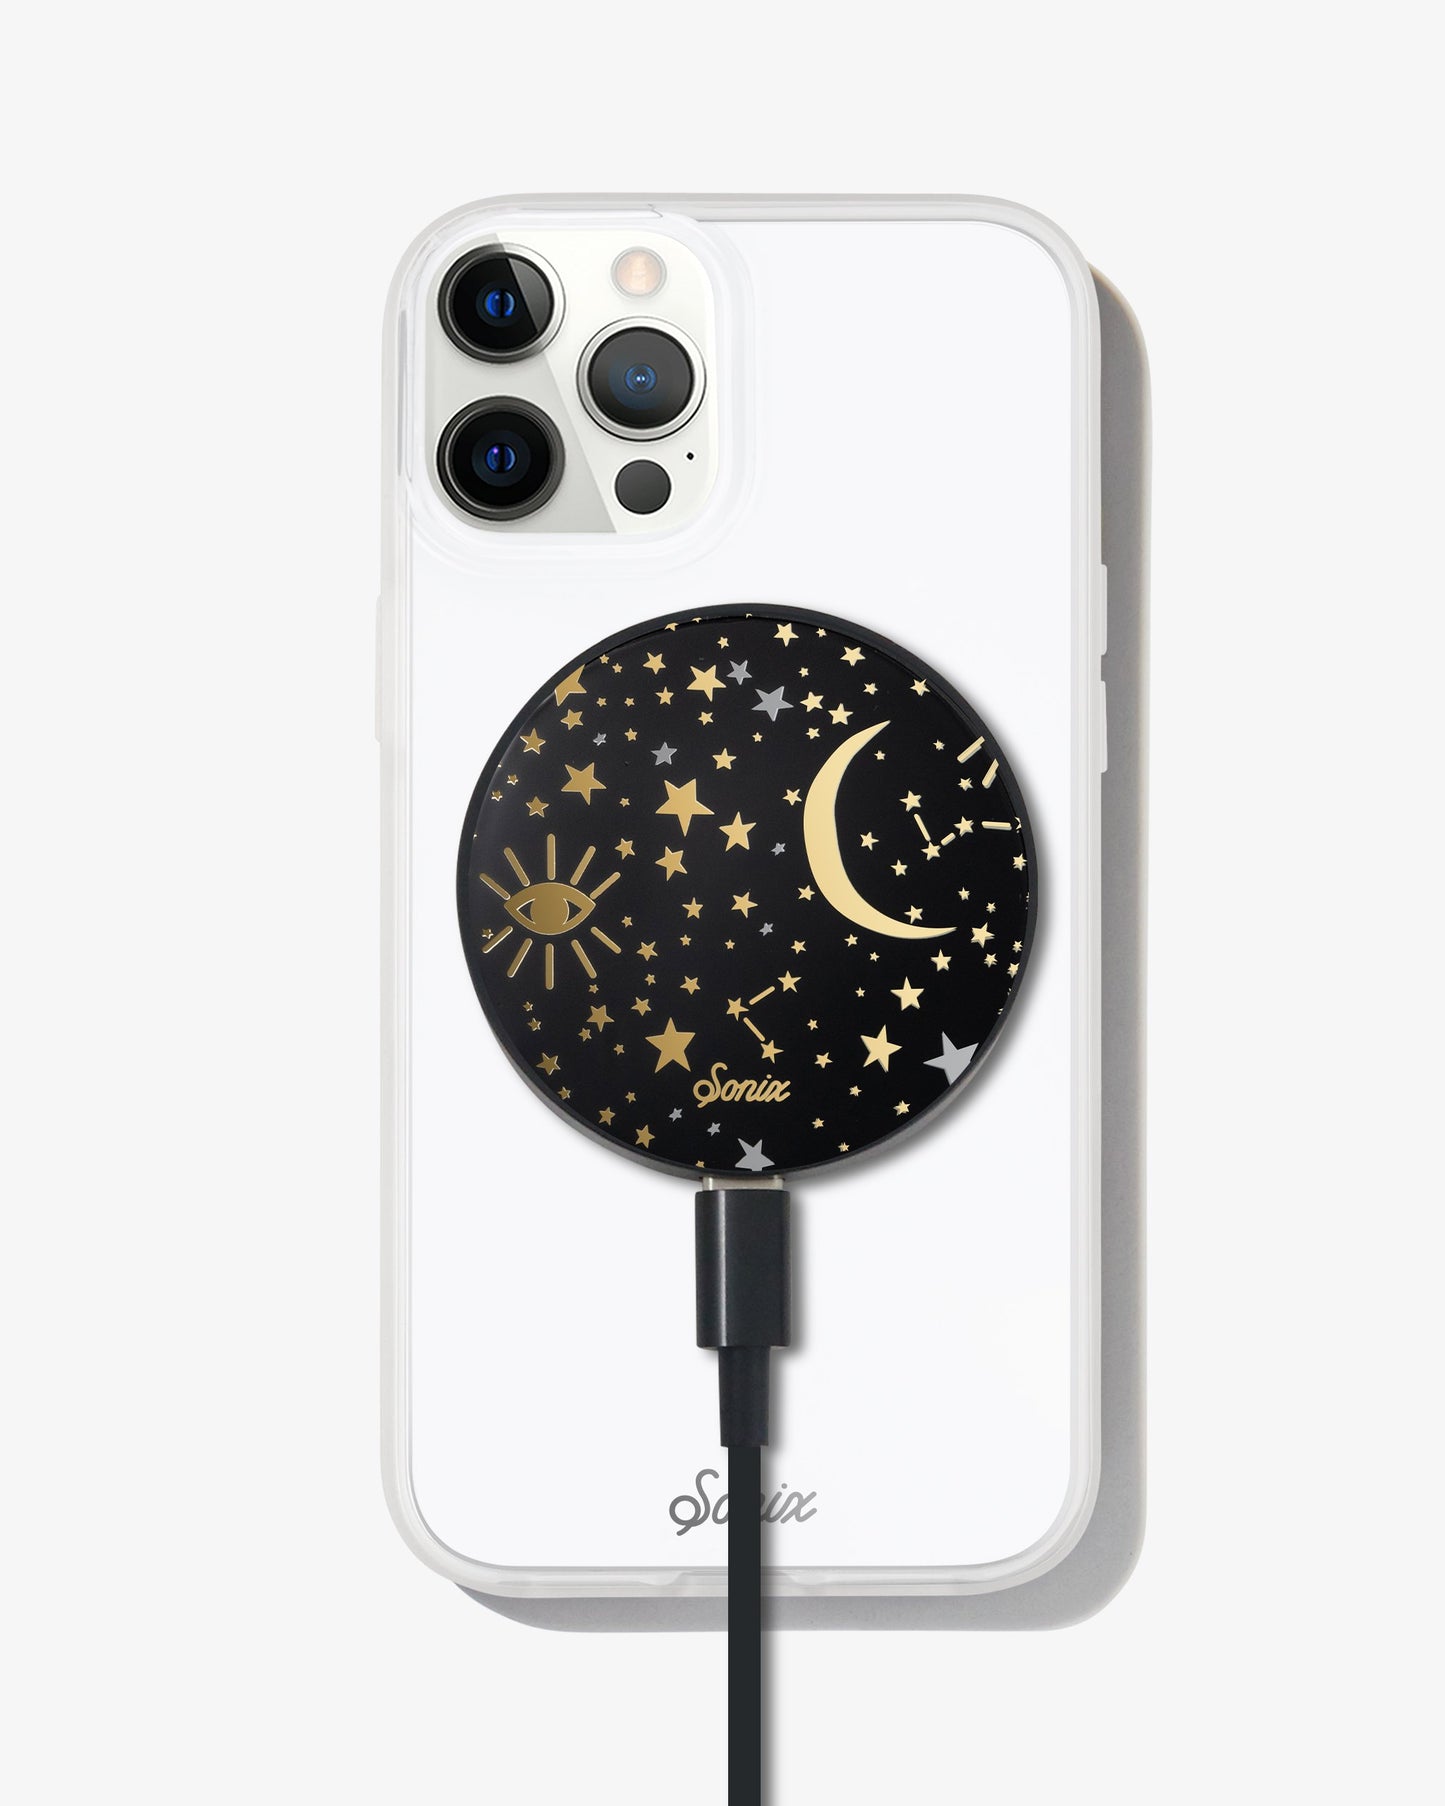 MagLink™ Wireless Charger - Cosmic